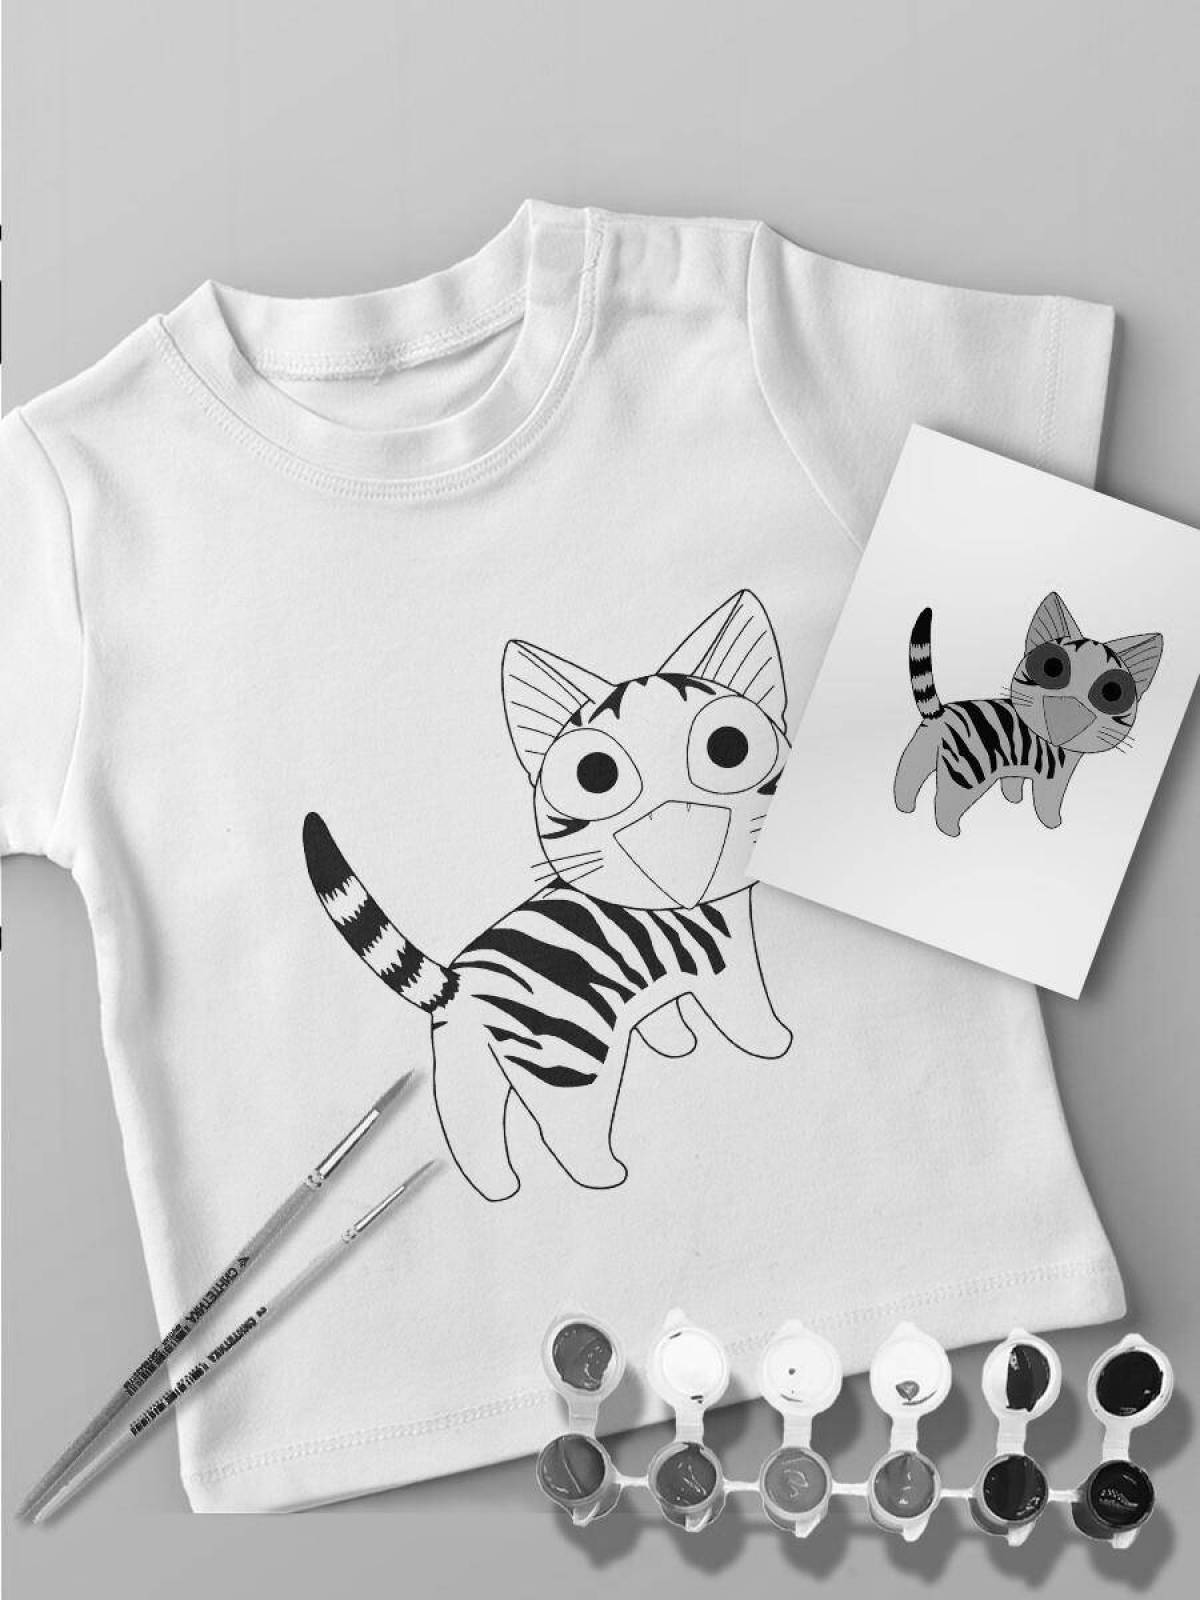 Coloring book glowing T-shirt with a kitten